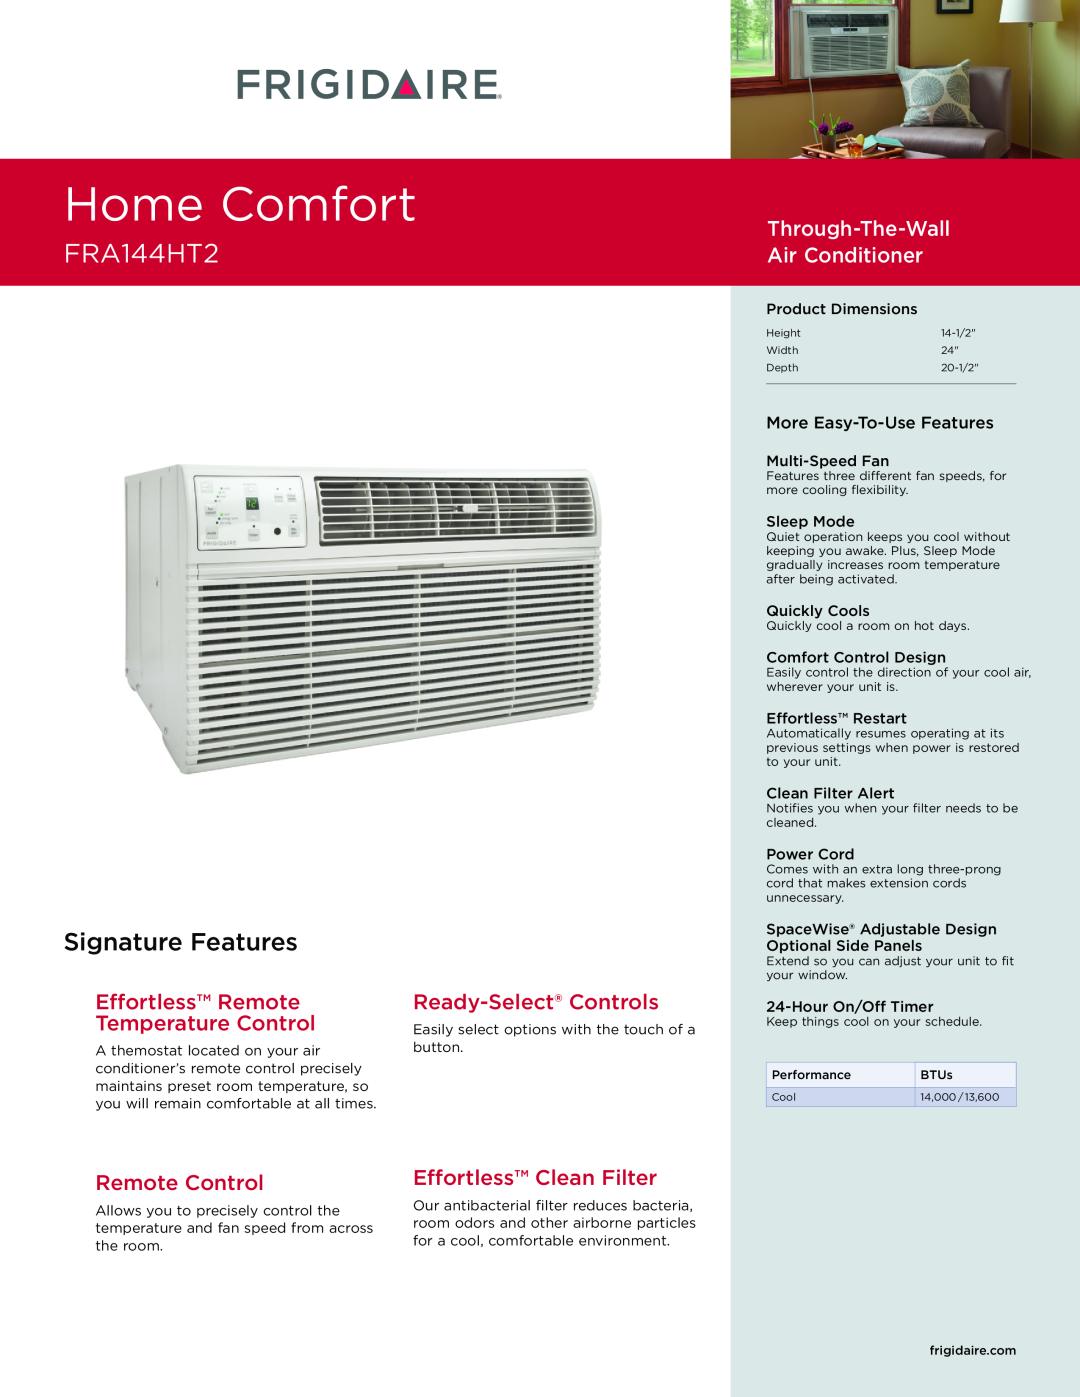 Frigidaire FRA144HT2 dimensions Home Comfort, Signature Features, Through-The-Wall Air Conditioner , Ready-Select Controls 